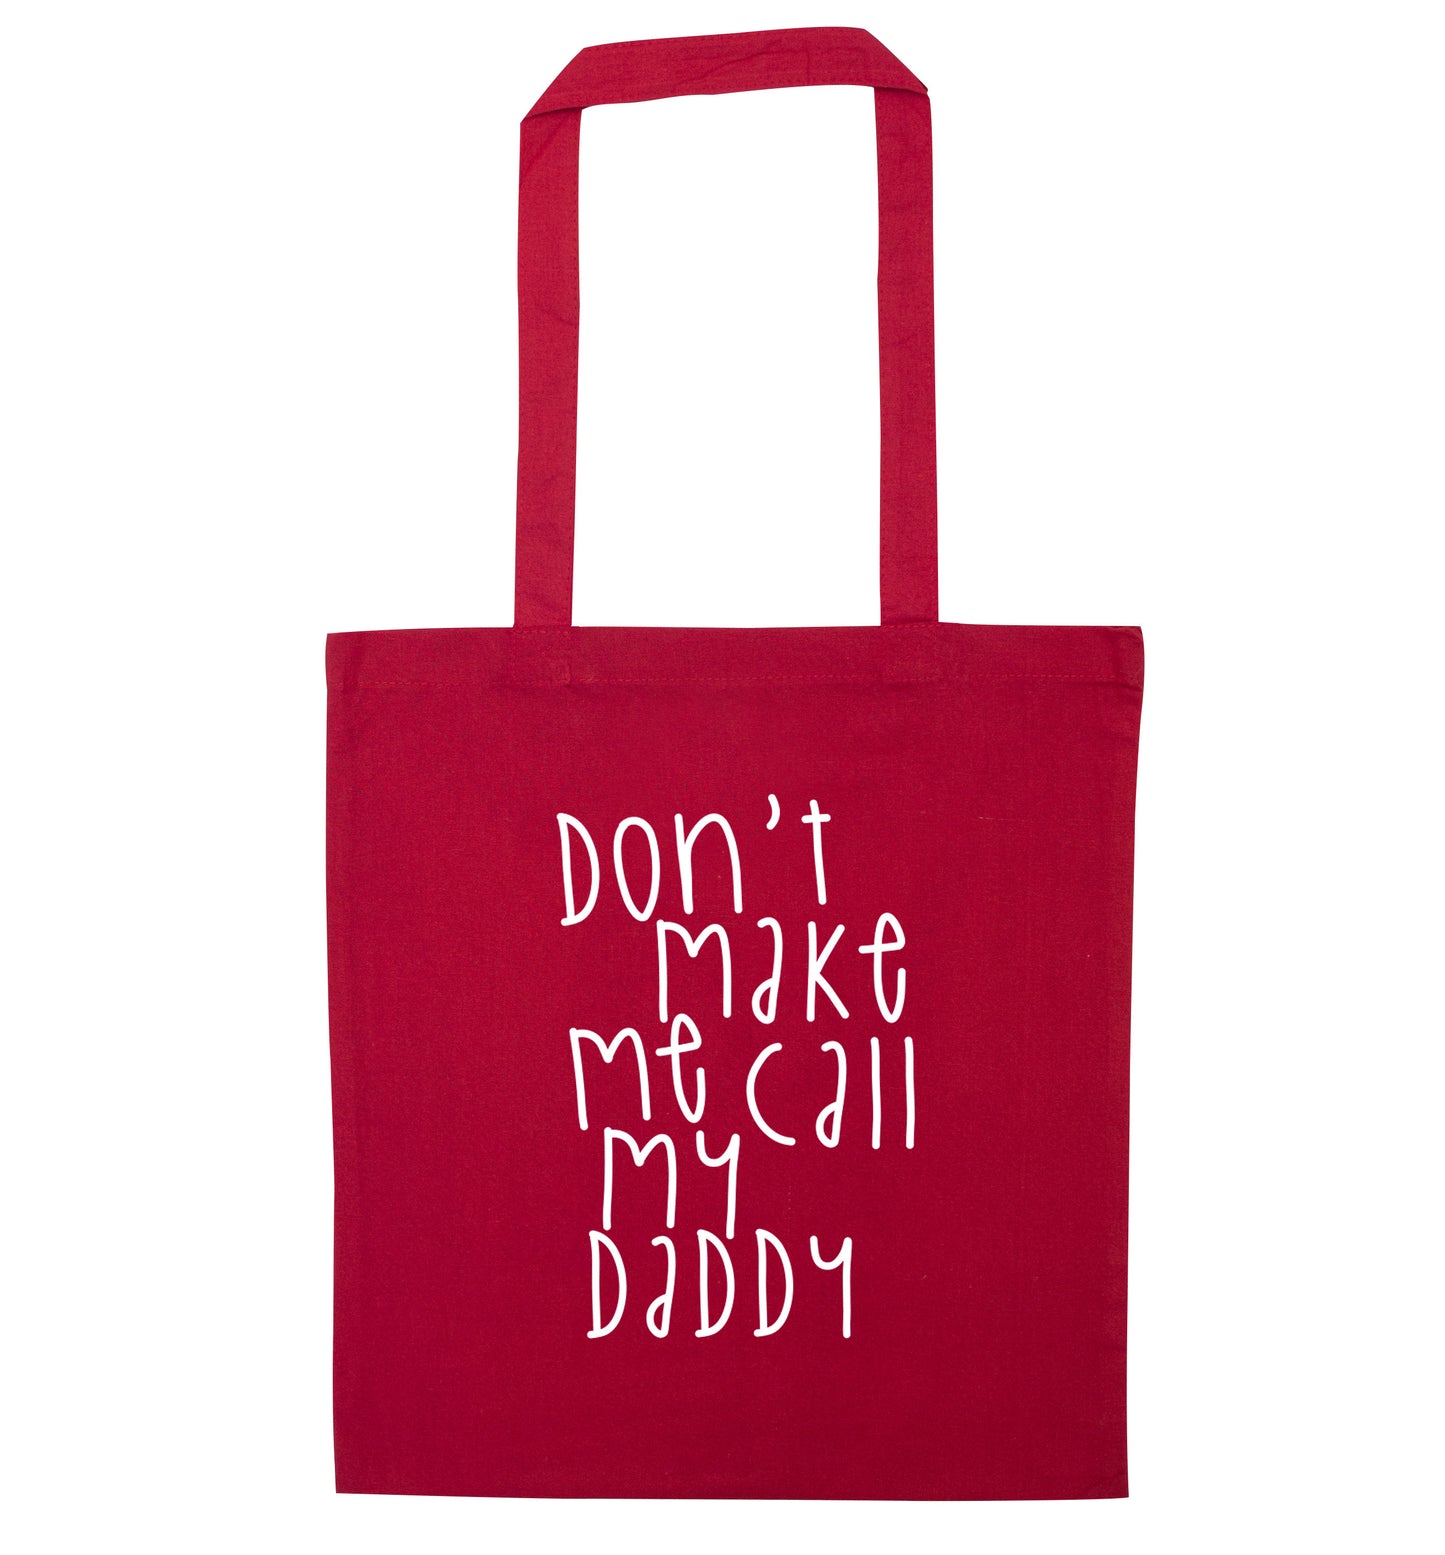 Don't make me call my daddy red tote bag